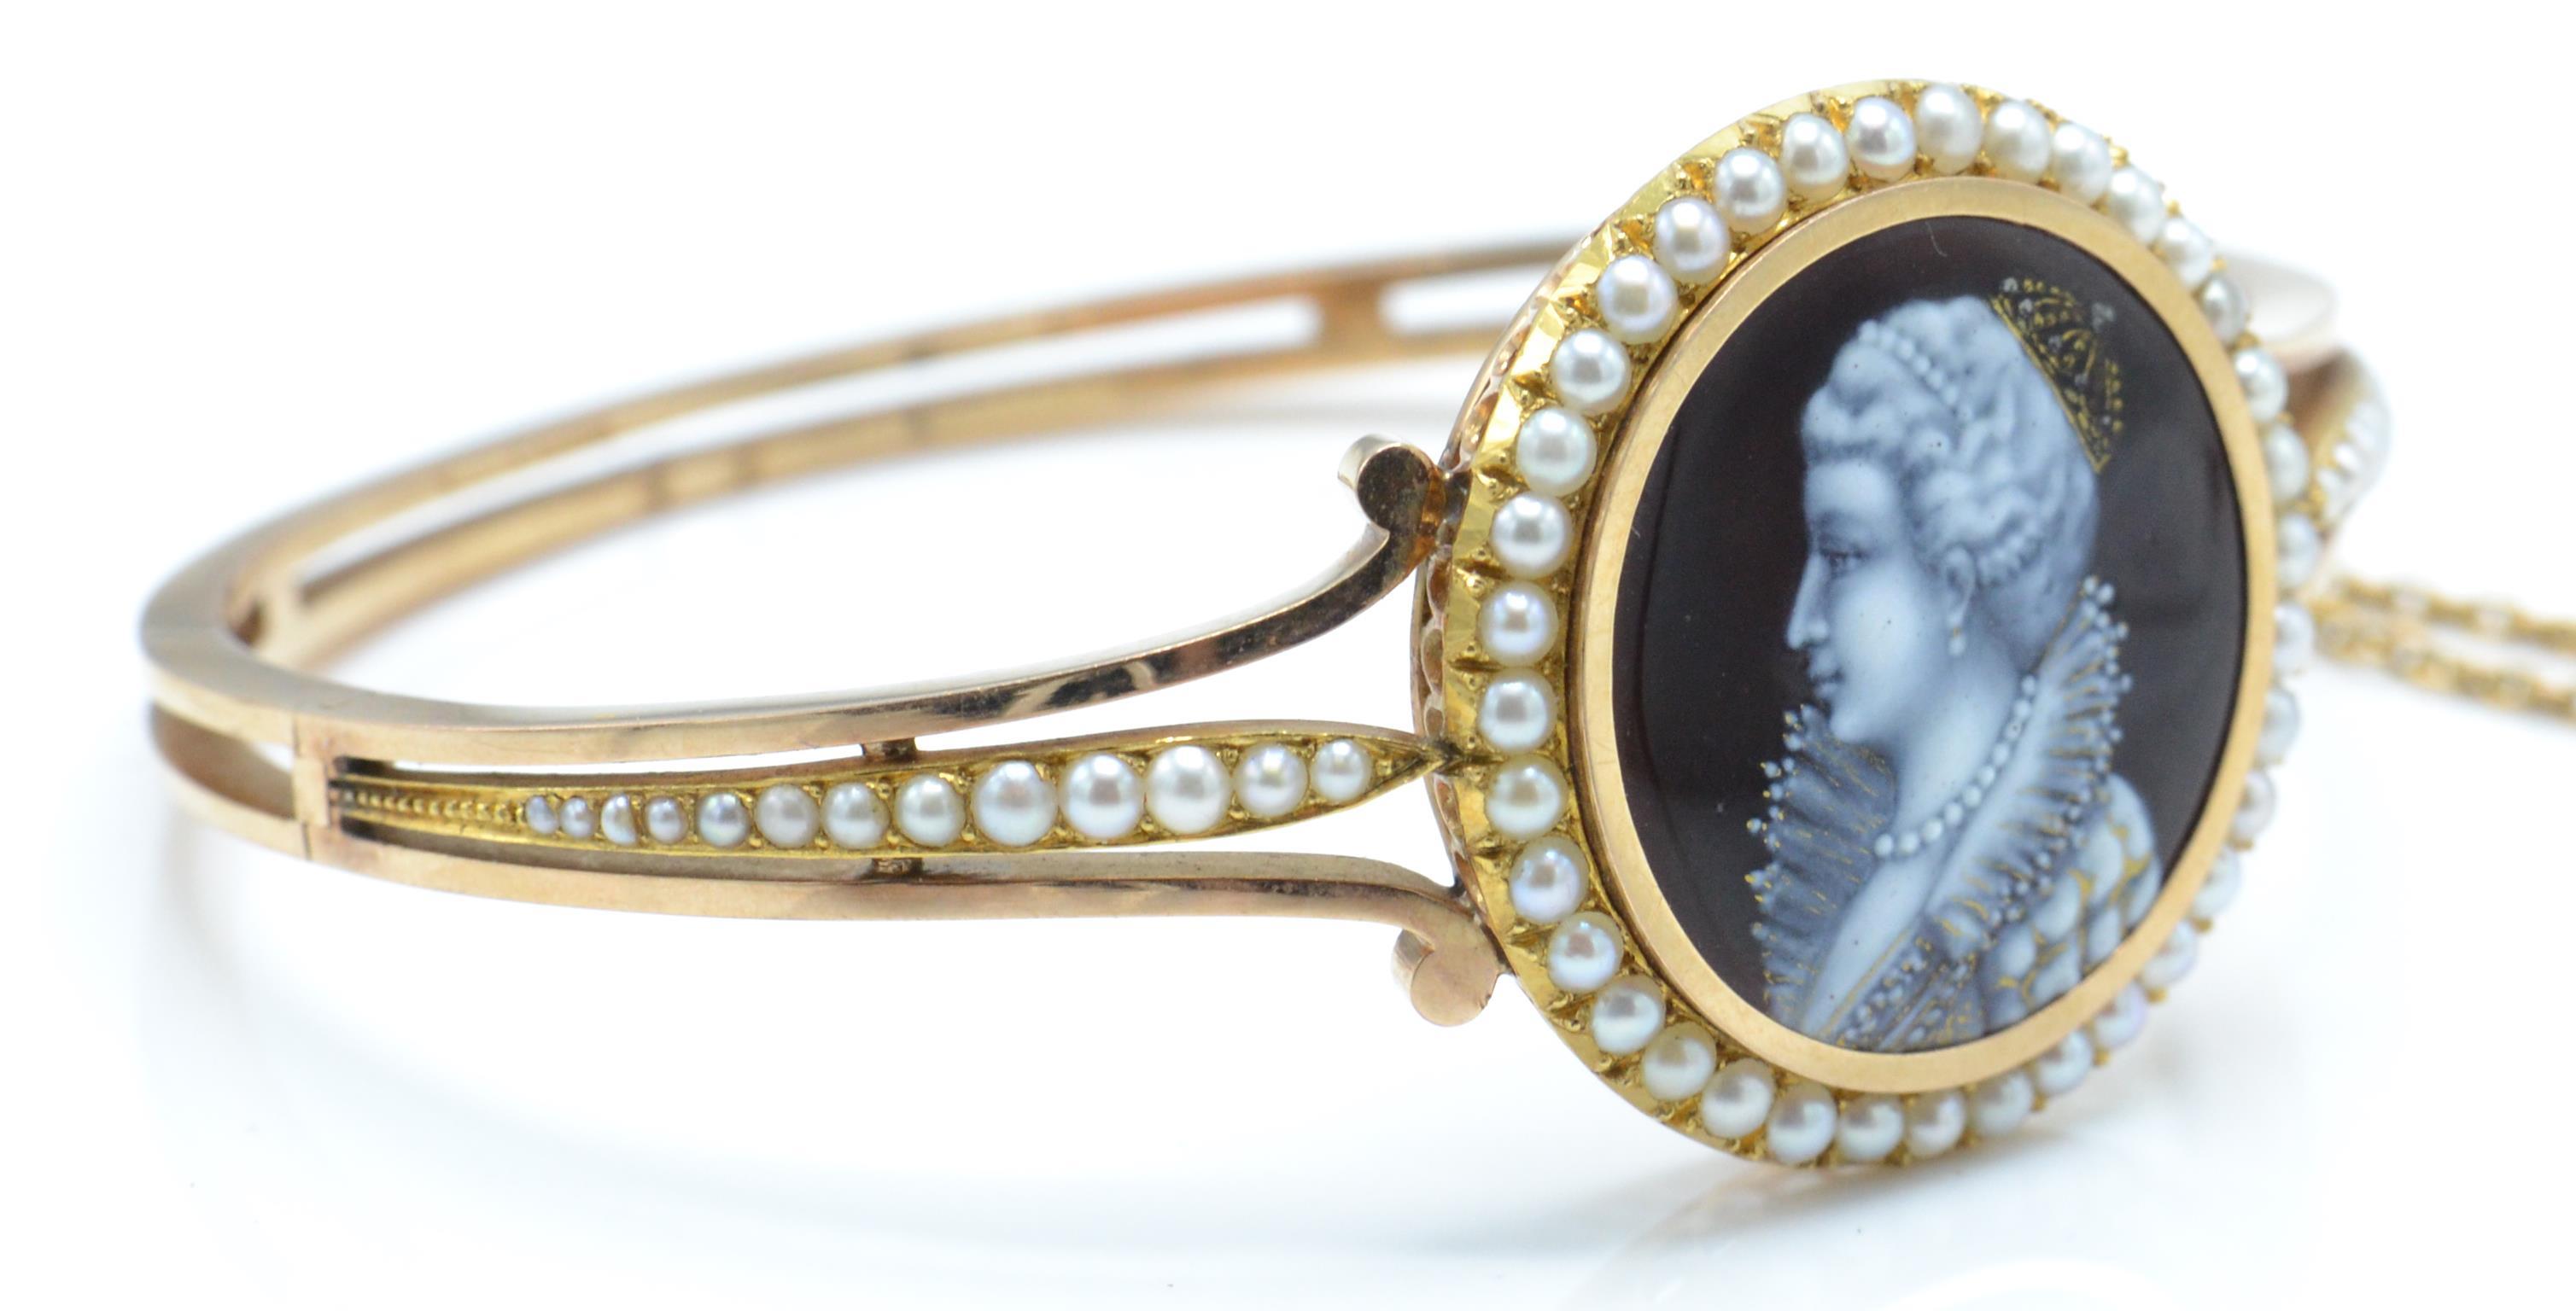 A 19TH CENTURY GOLD & SEED PEARL HINGED BANGLE BRACELET - Image 3 of 5